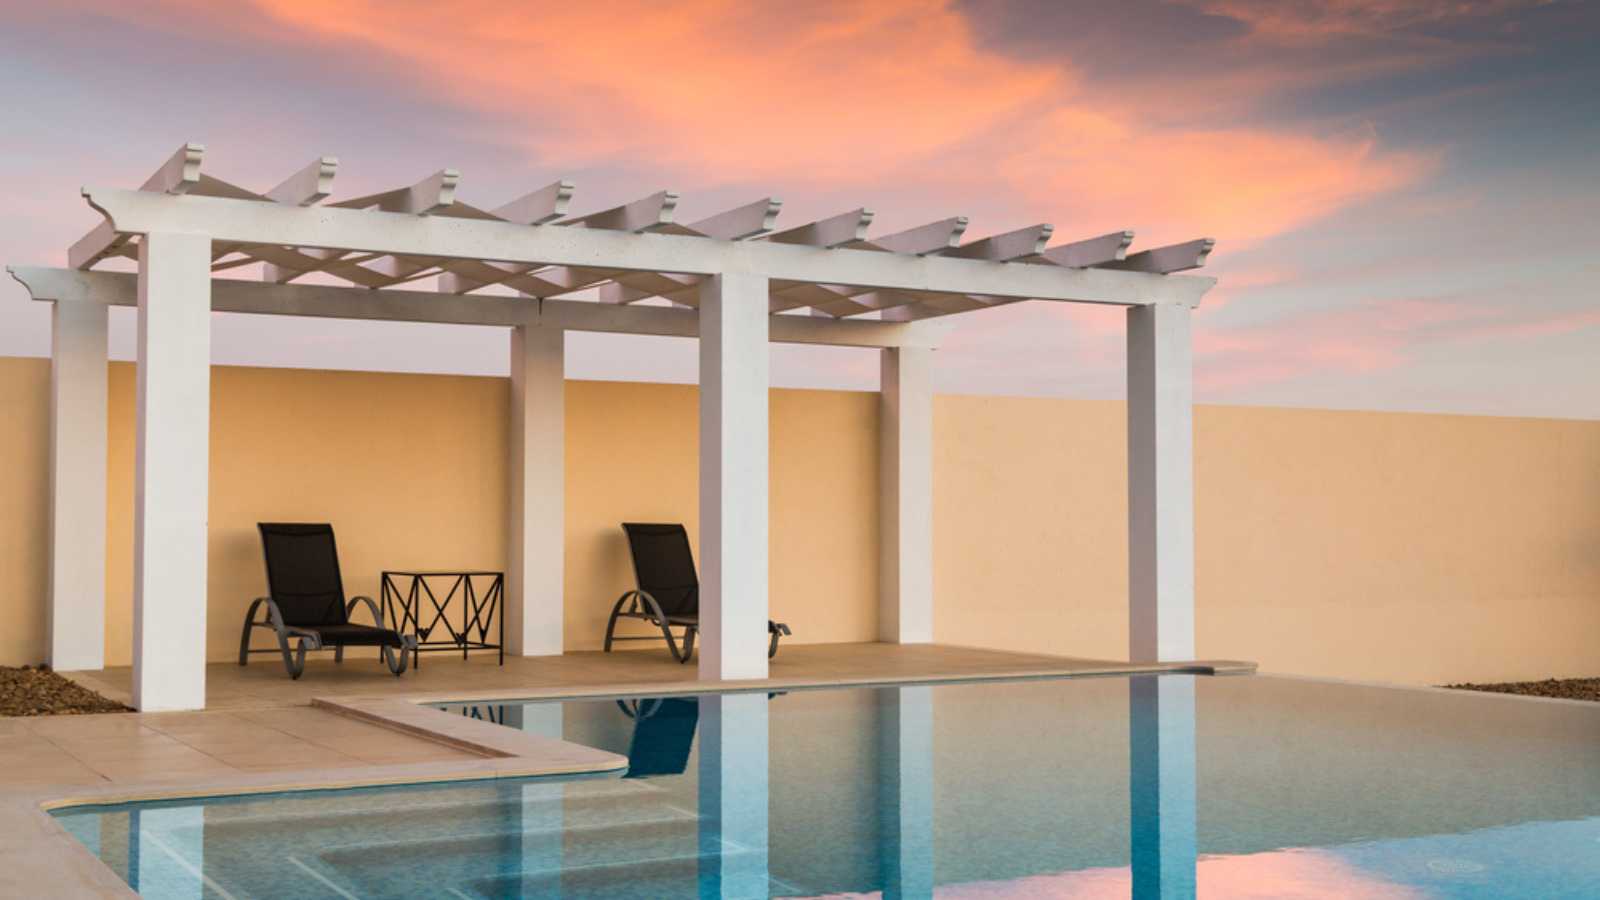 White poolside pergola, gazebo providing shade on a terrace patio area next to an infinity swimming pool at dusk as the sunset turns the sky pink orange.